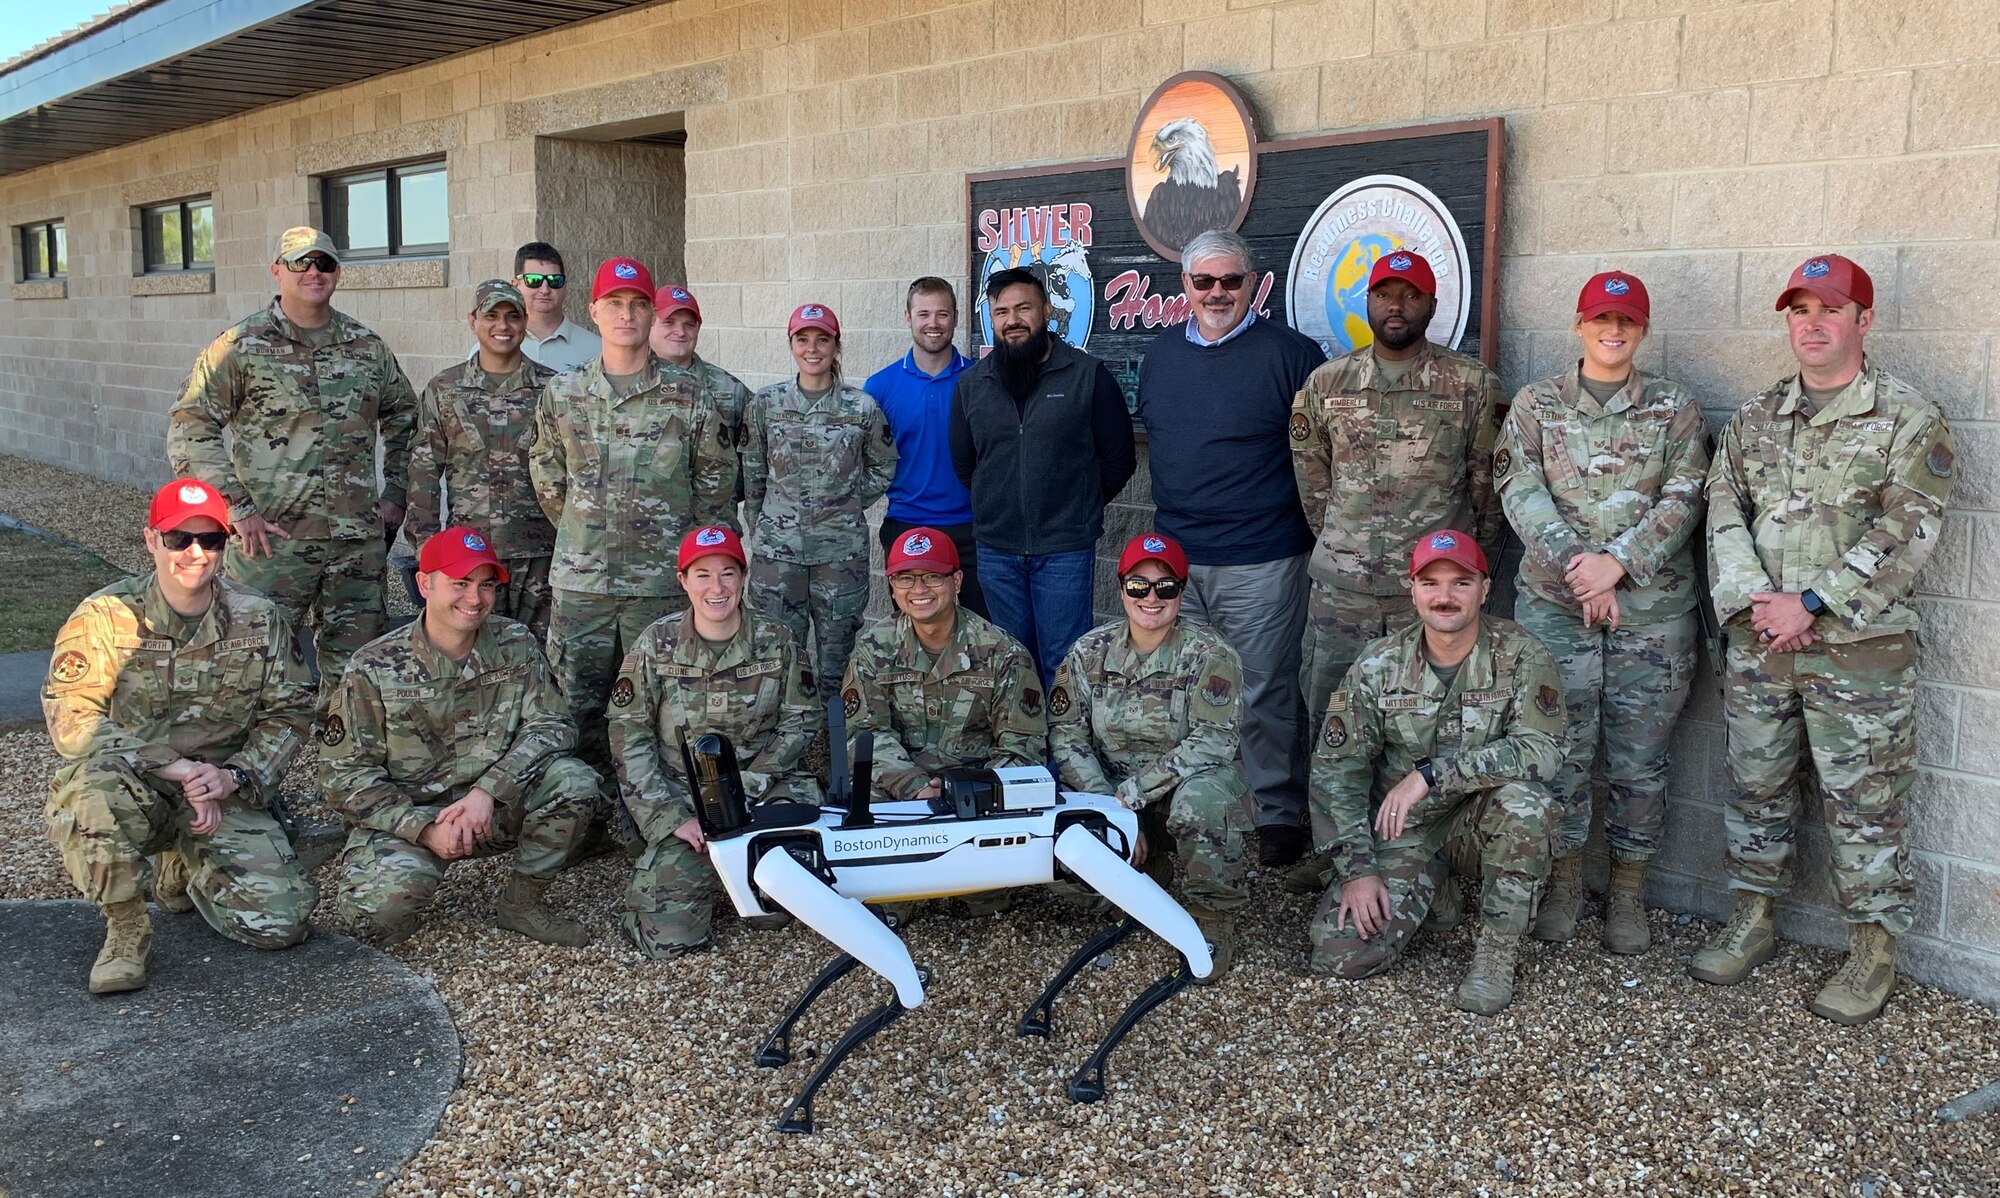 Group photo with an small unmanned ground vehicle.